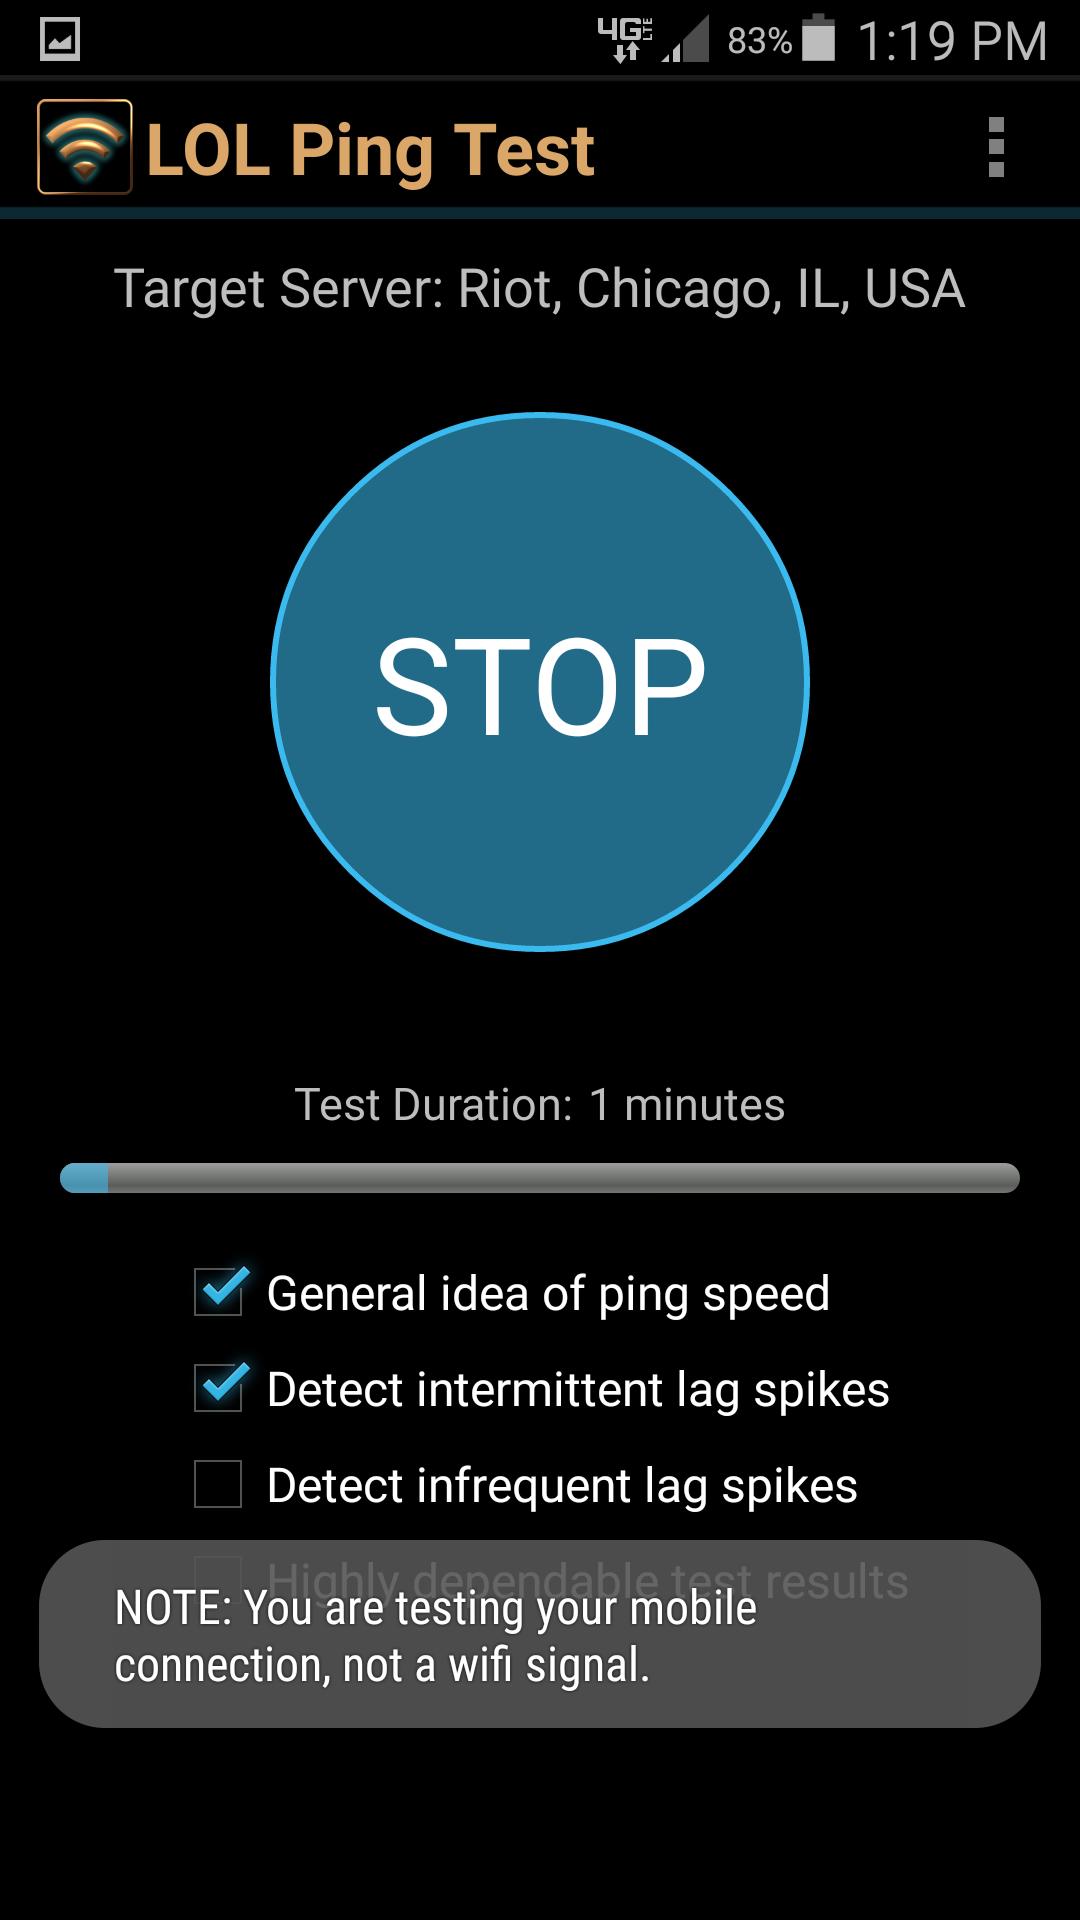 LOL Ping Test for Android - APK Download